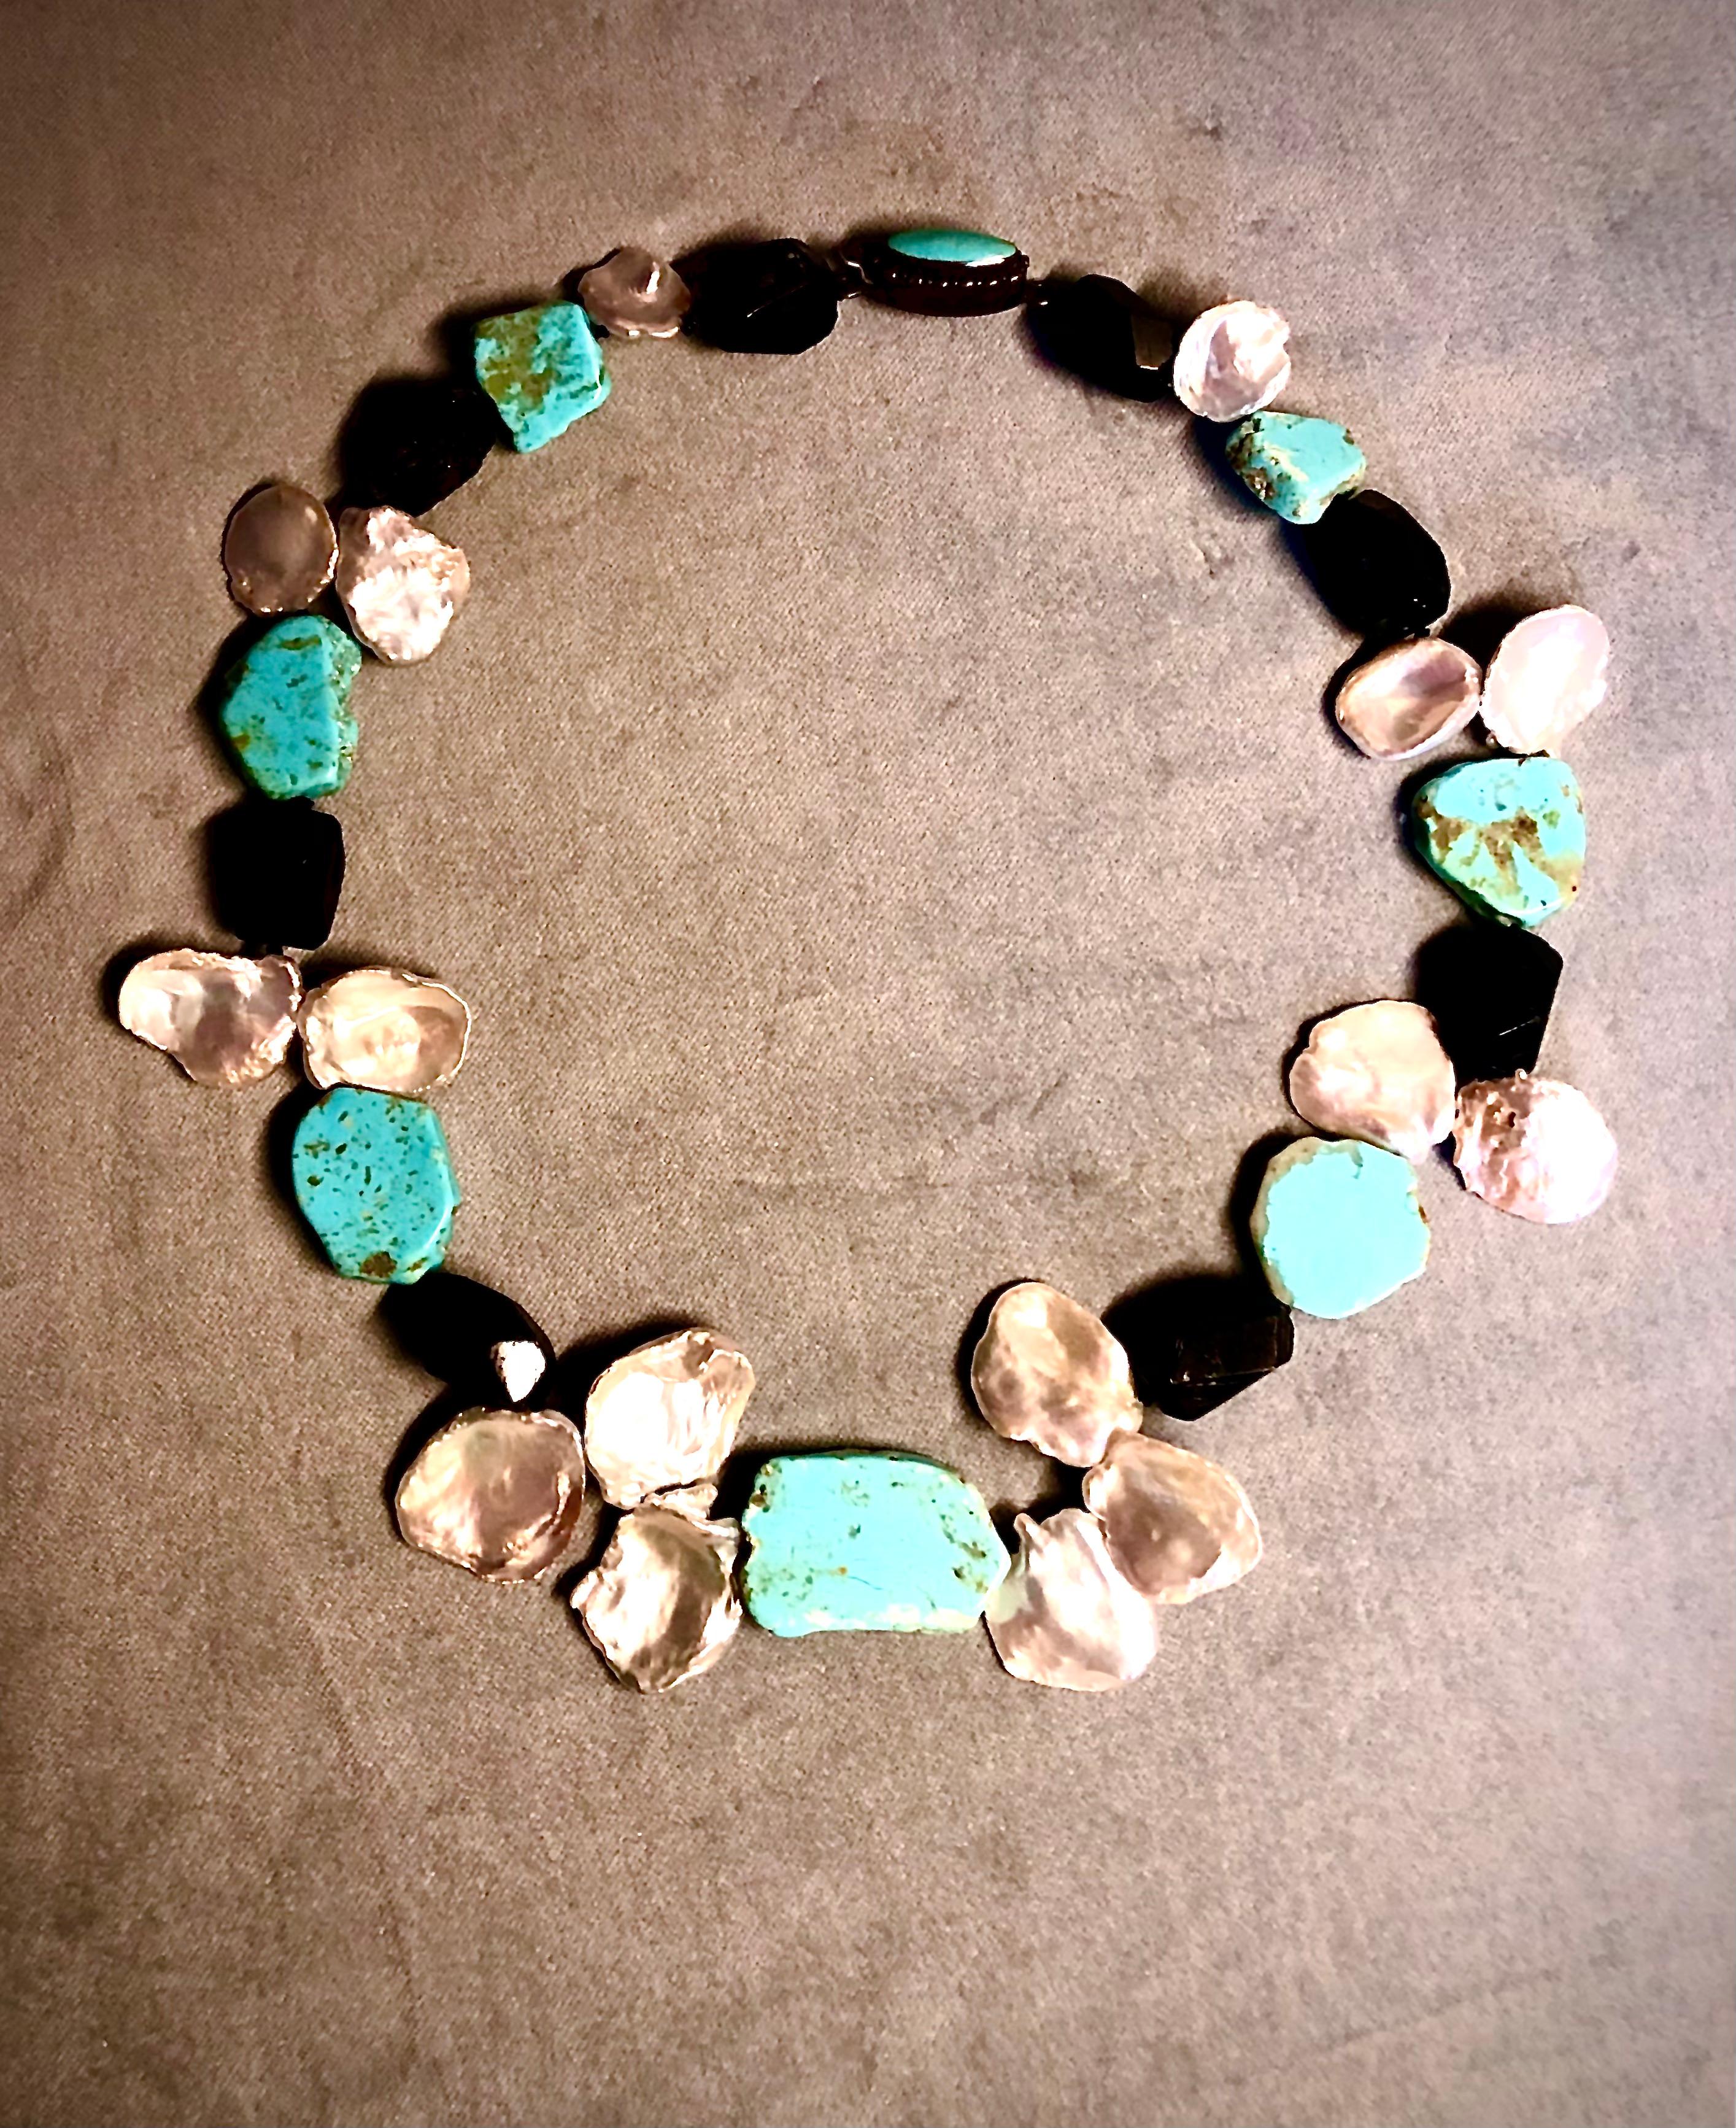 Bold statement necklace of richly colored Kingman turquoise slabs interspersed with chunky tumbled tourmaline beads and very large baroque Keshi fan pearls. The necklace terminates in a lovely finely detailed box clasp set with turquoise in oxidized